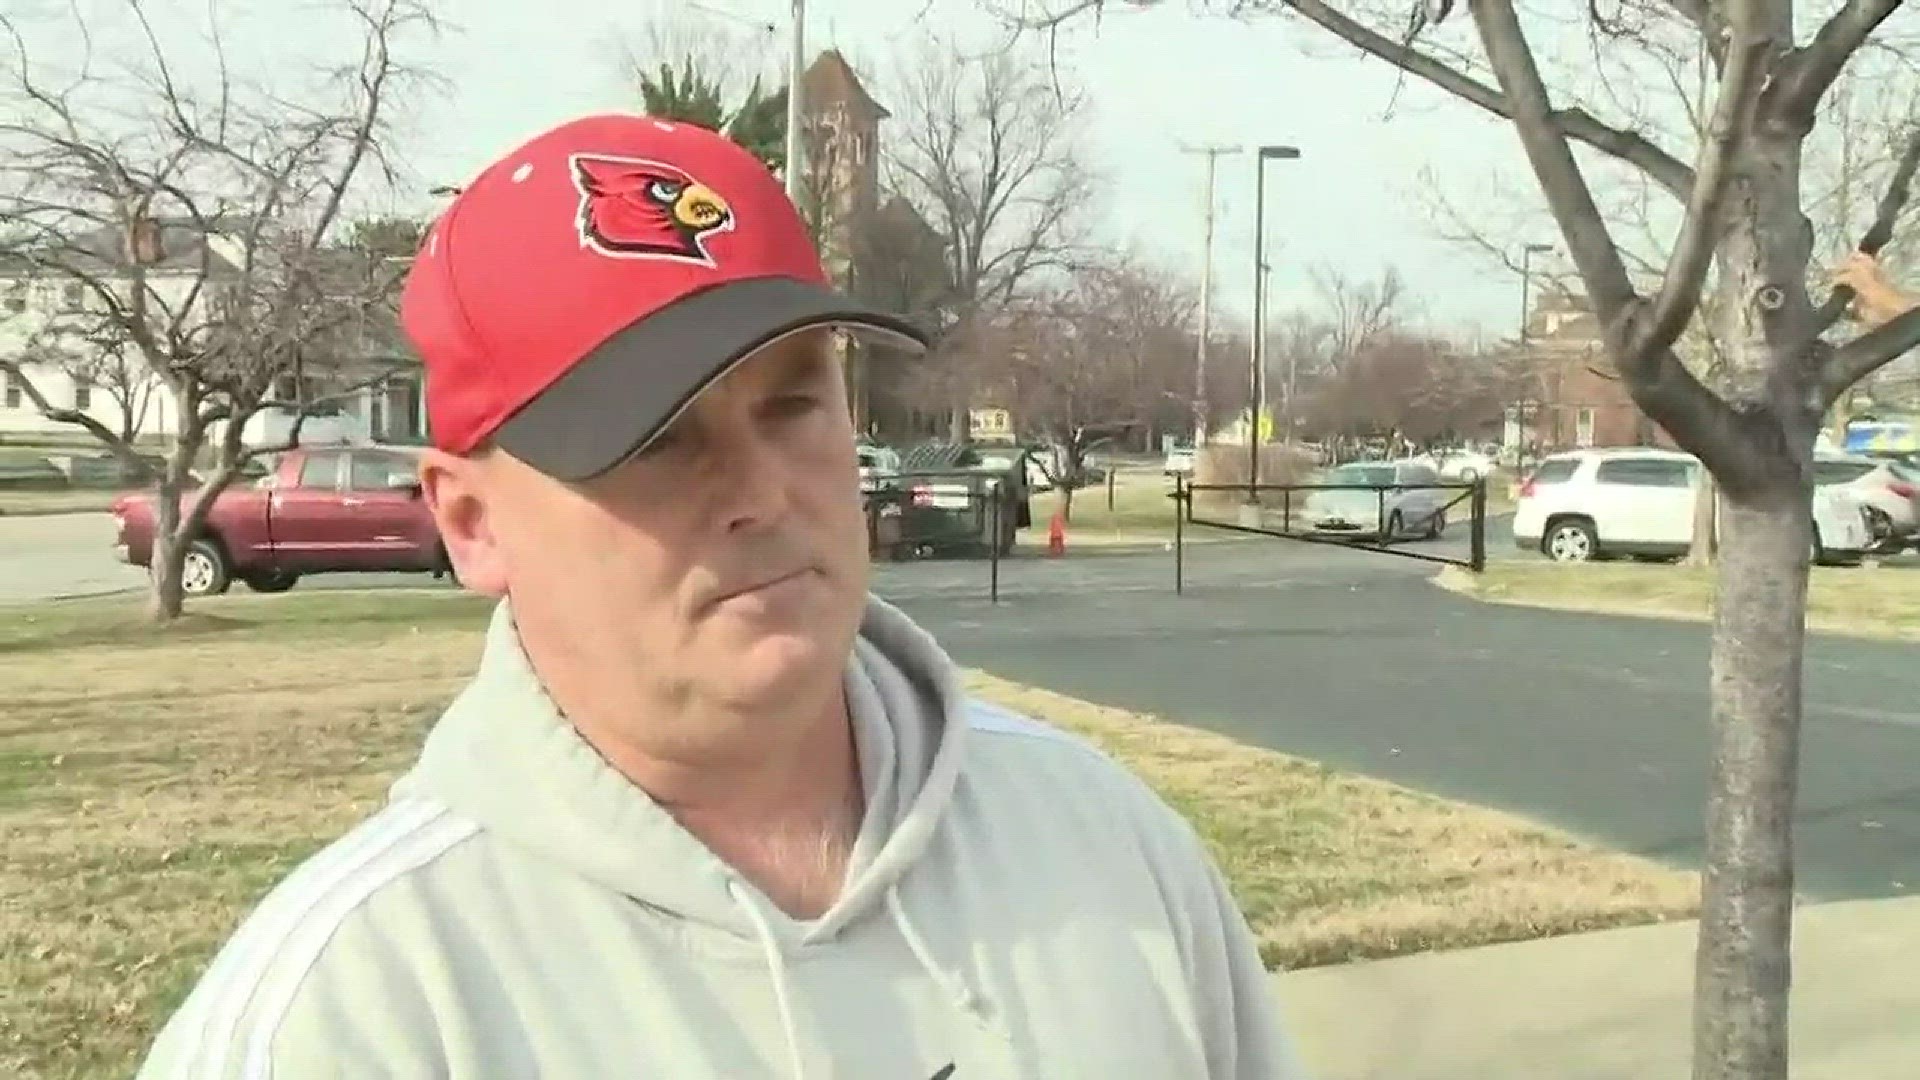 Fans say they will continue to support the Cards.